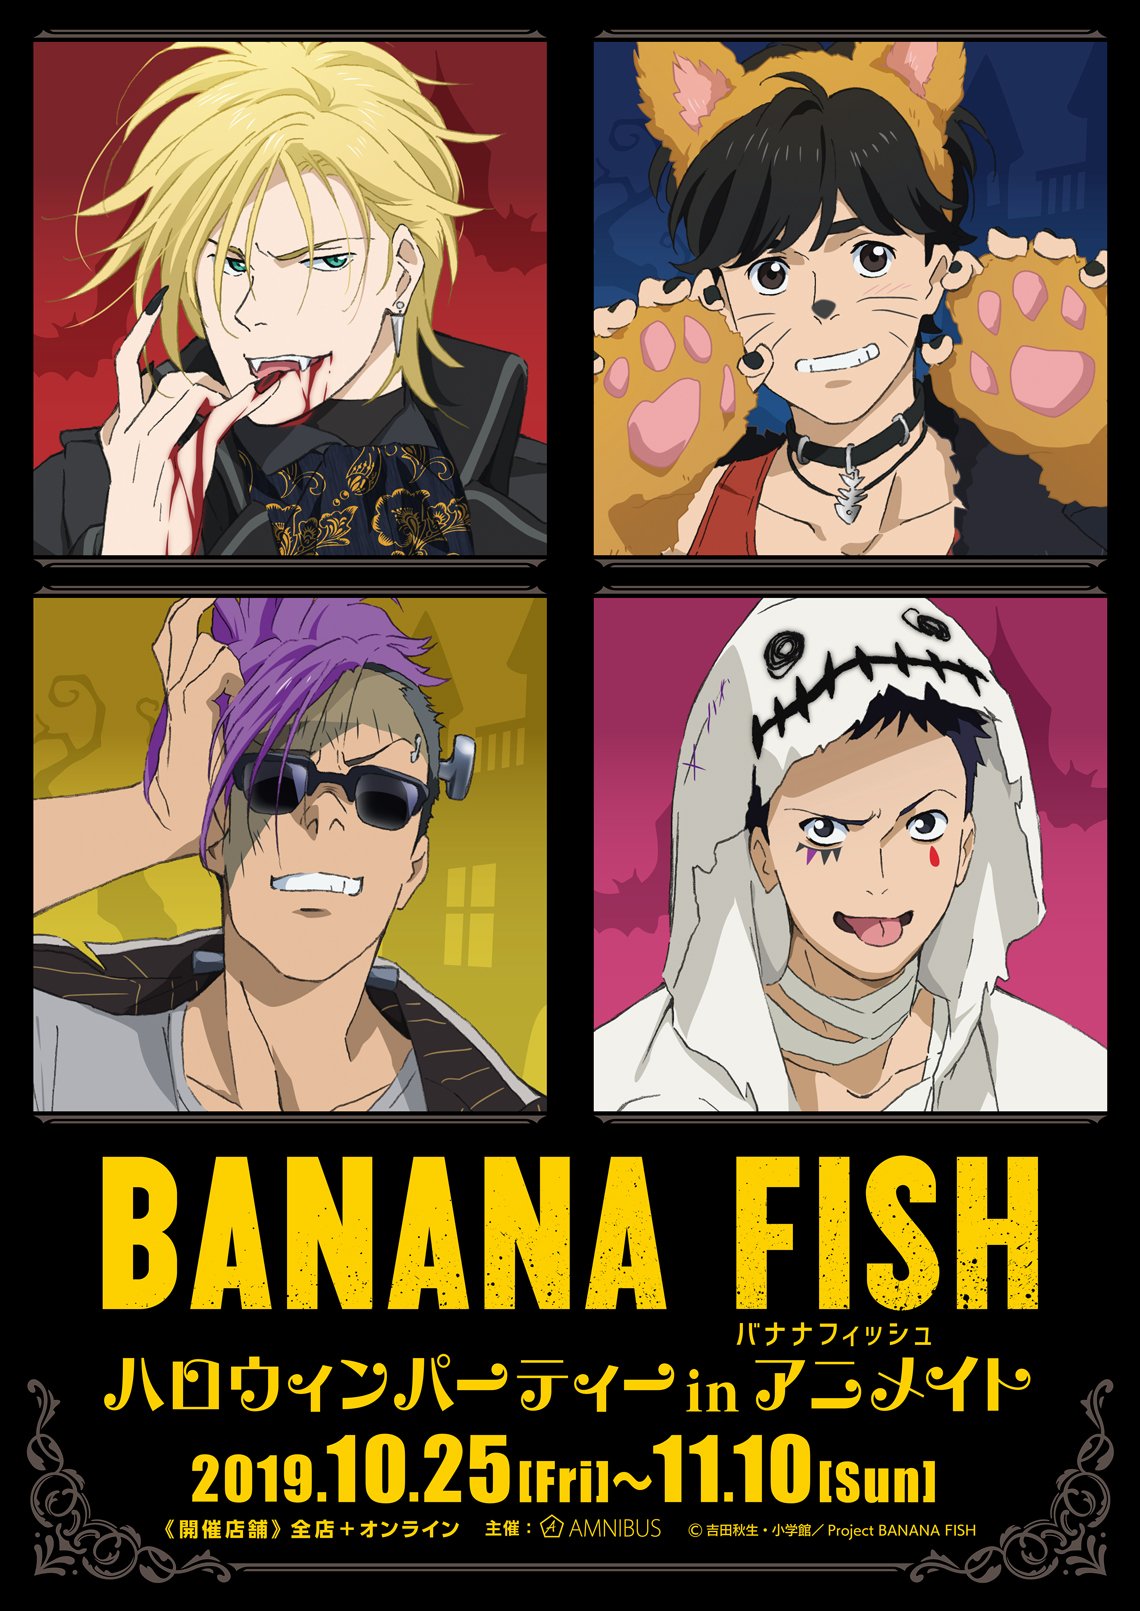 The Banana Fish Halloween Party In Animate Is To Be Held From 10 25 To 11 10 Fandom